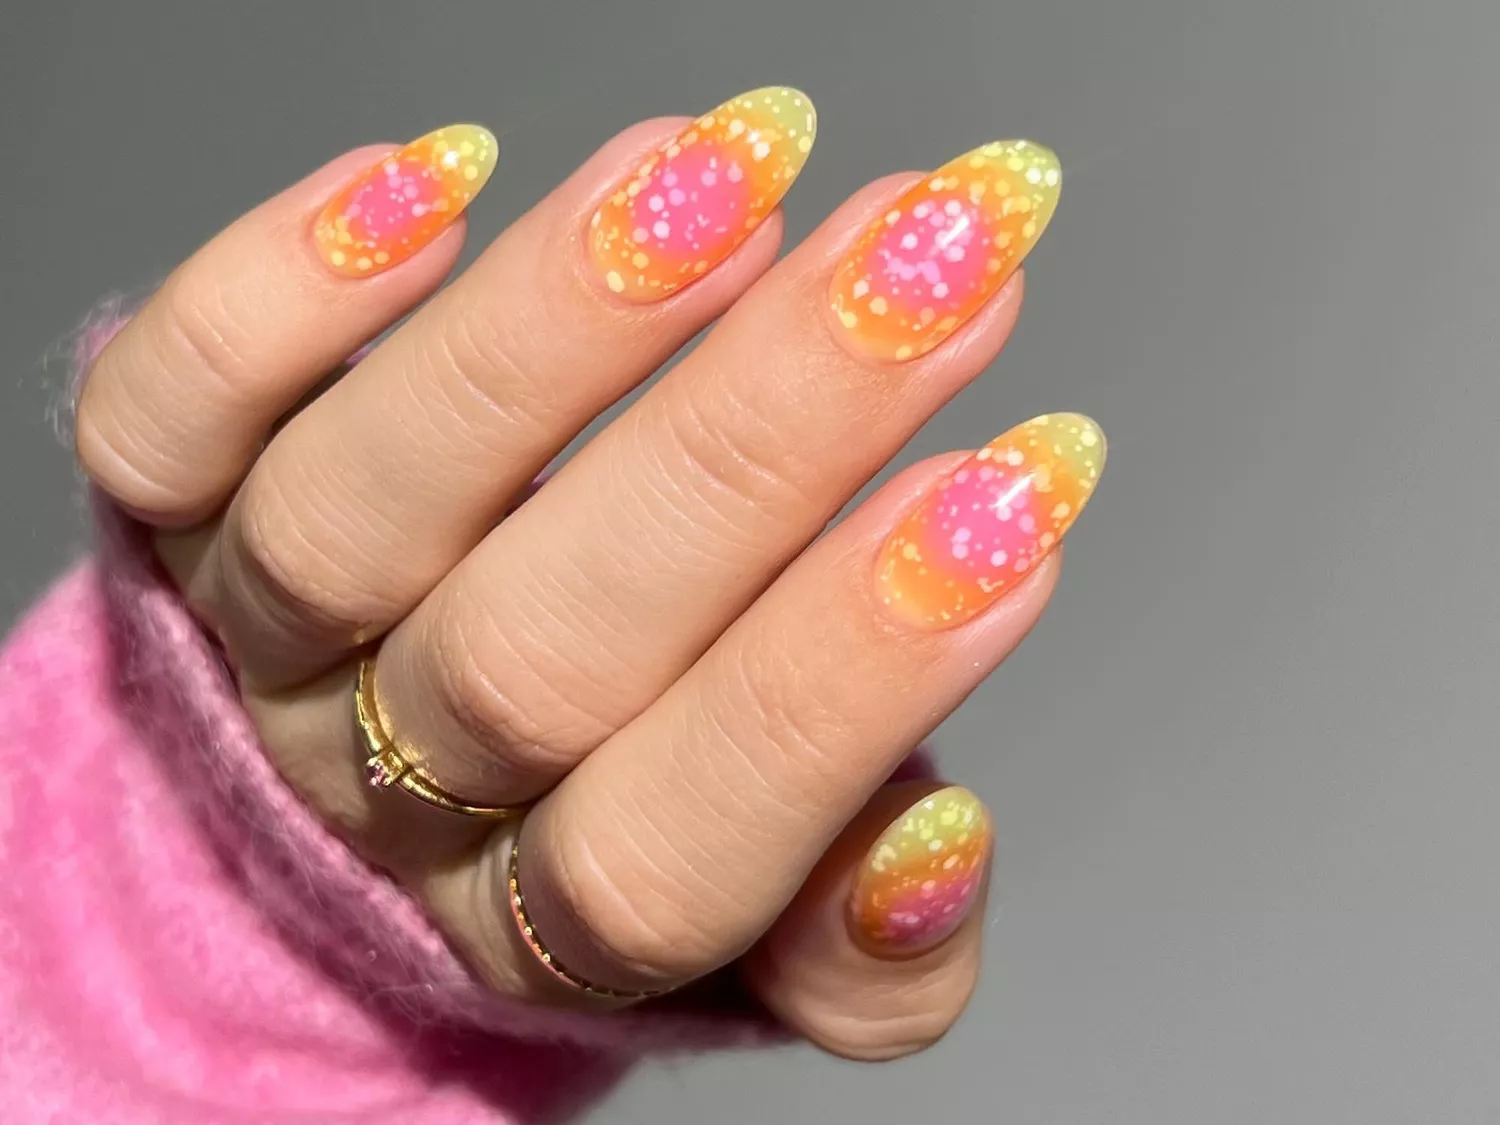 Manicure with pink and yellow ombre aura base and confetti texture